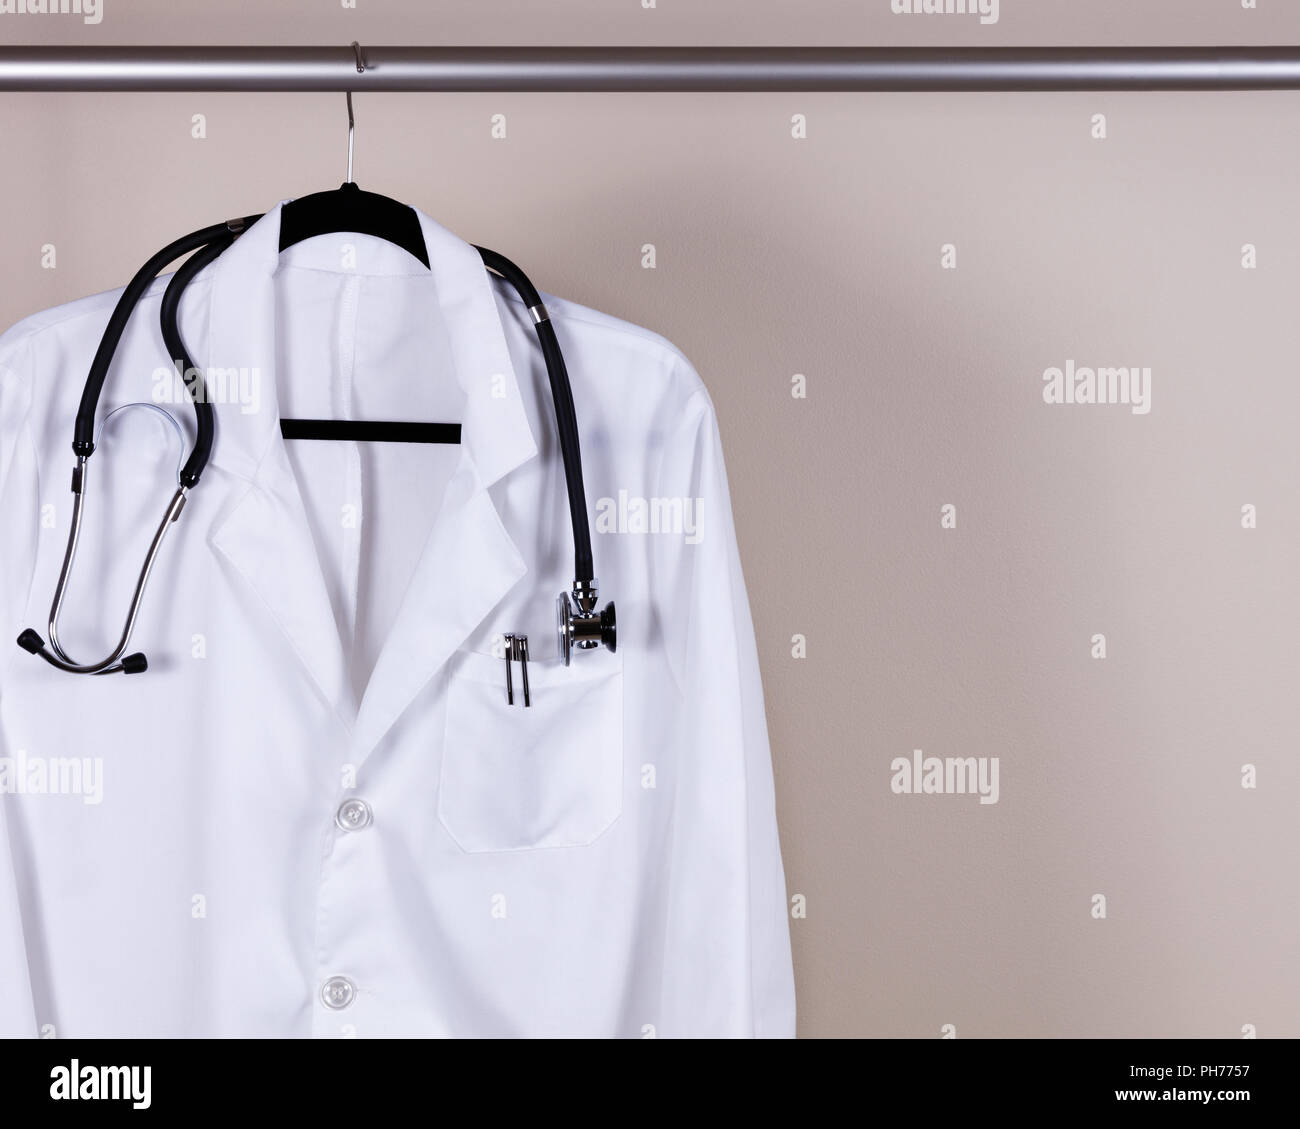 Medical white consultation coat with stethoscope and pens on hanger Stock Photo